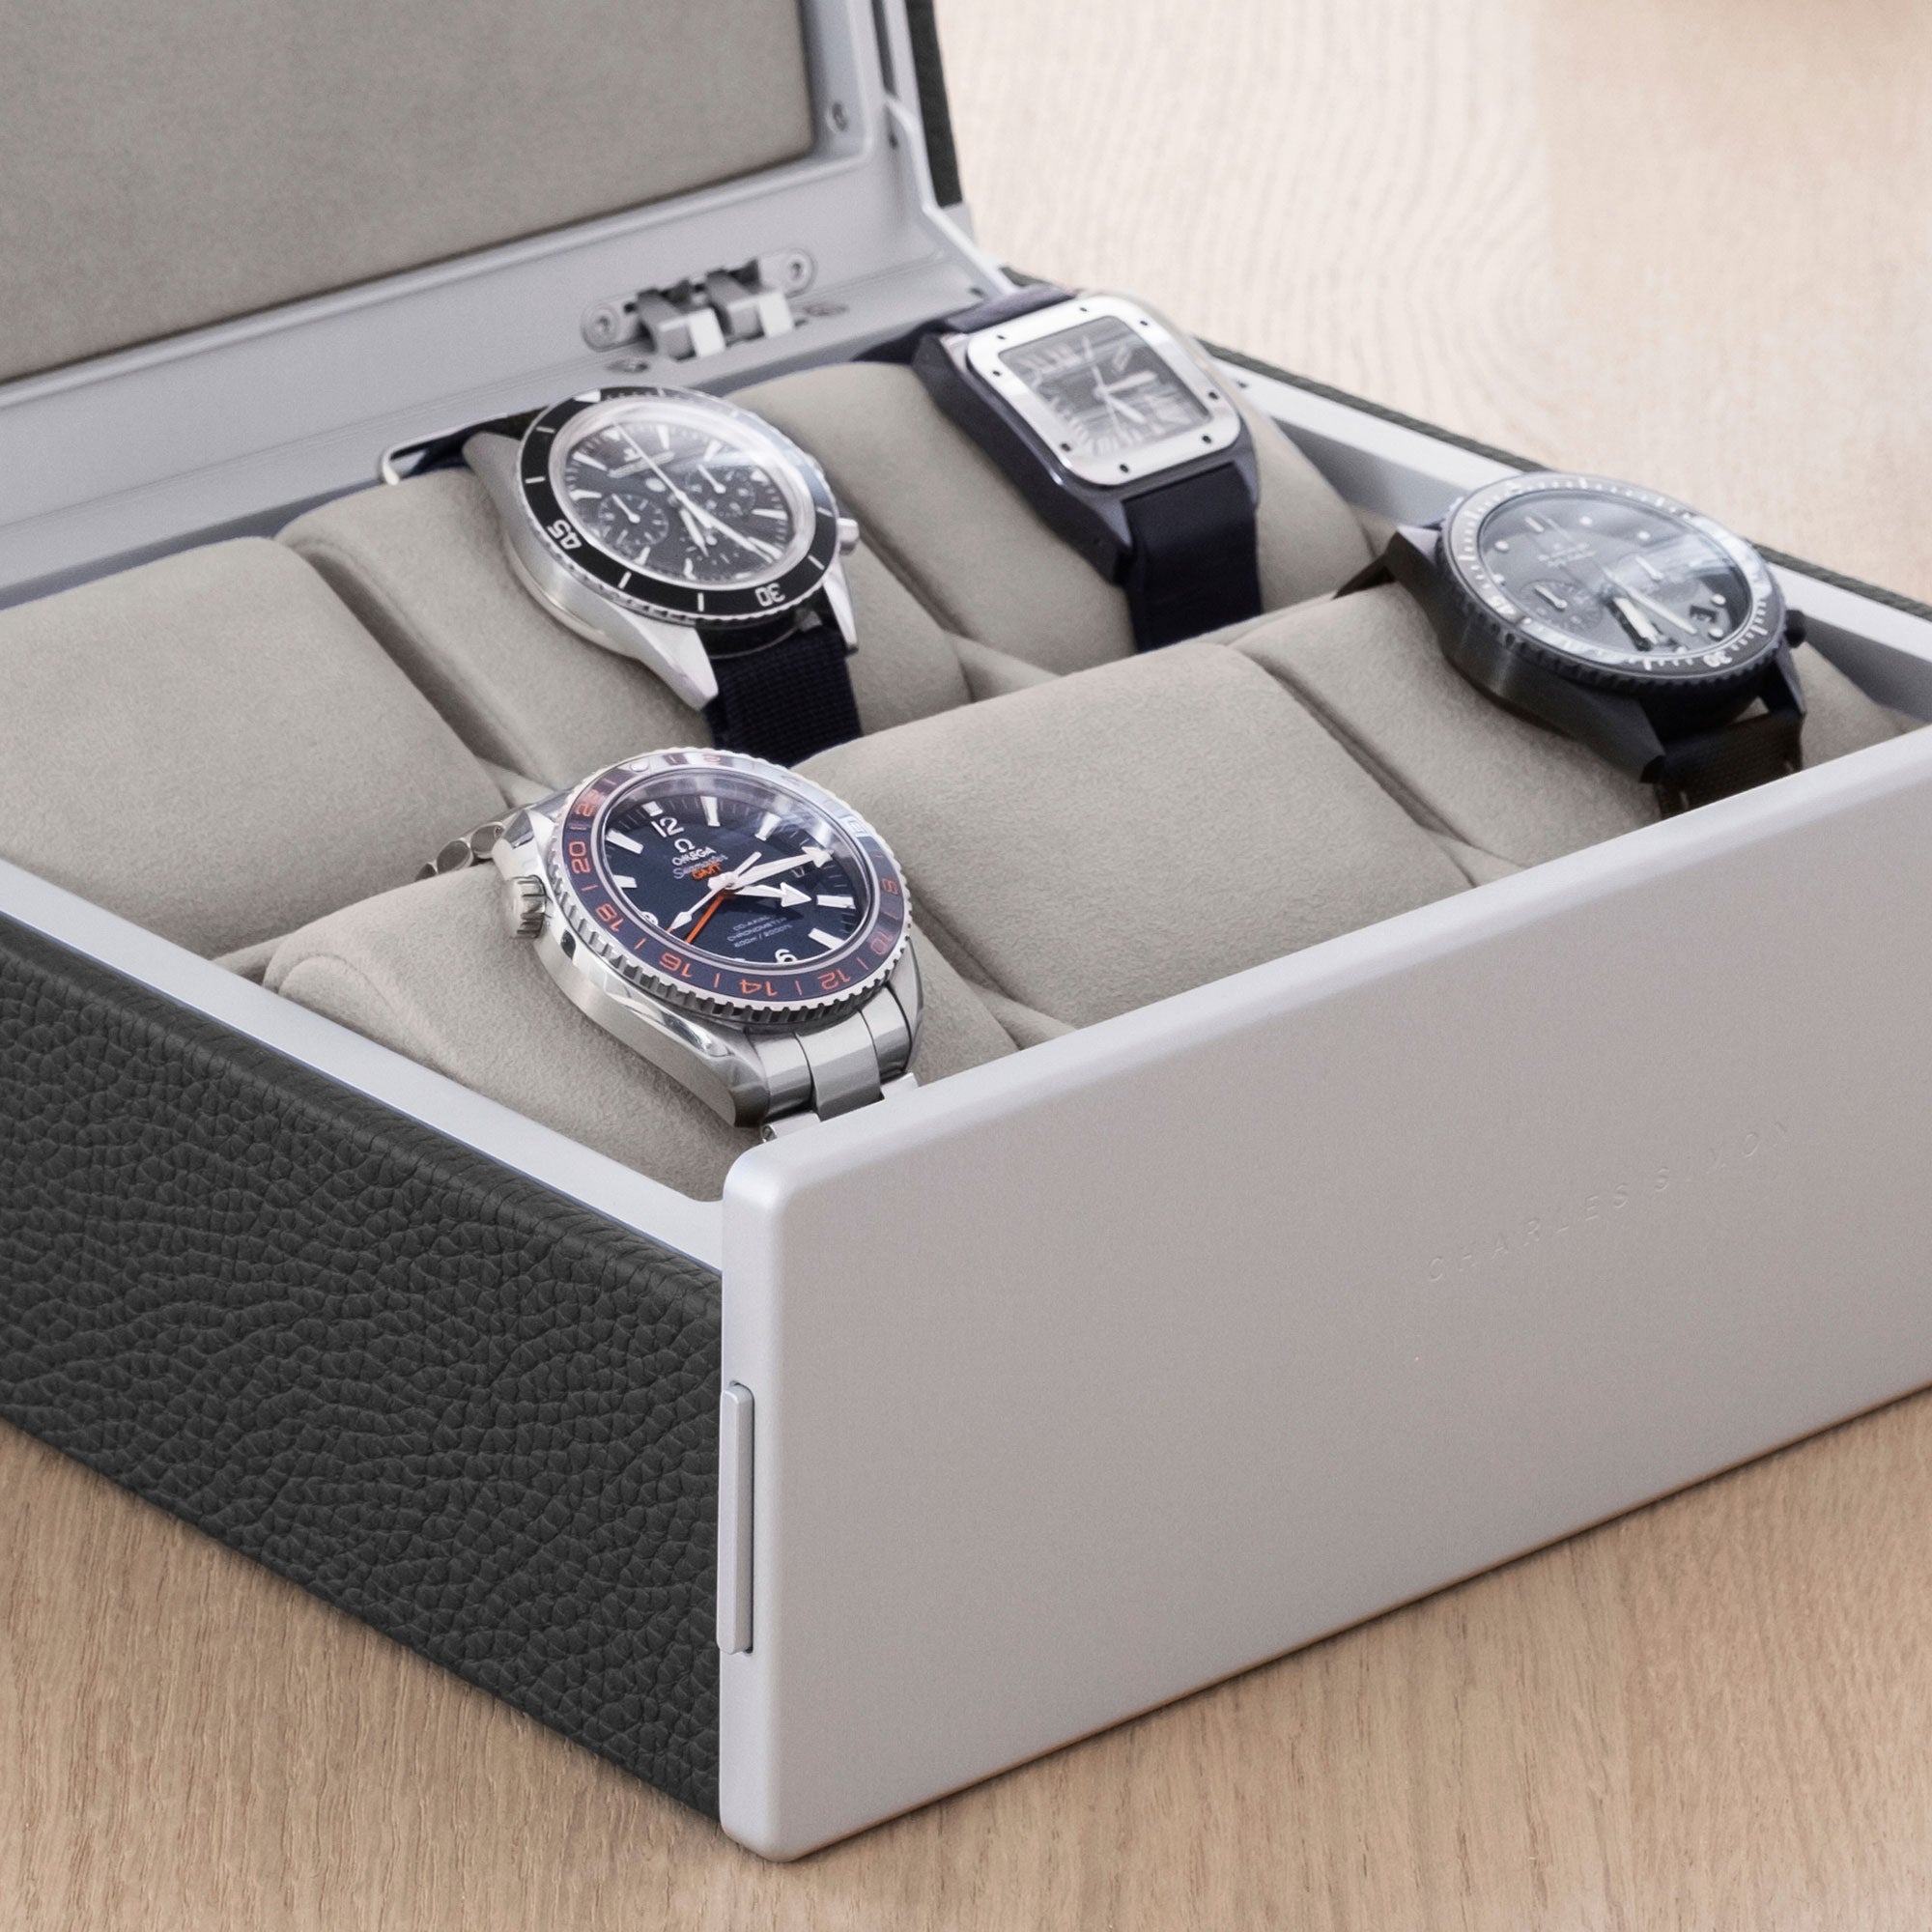 Detail photo of Spence 6 Watch box in graphite leather showcasing luxury watch collection